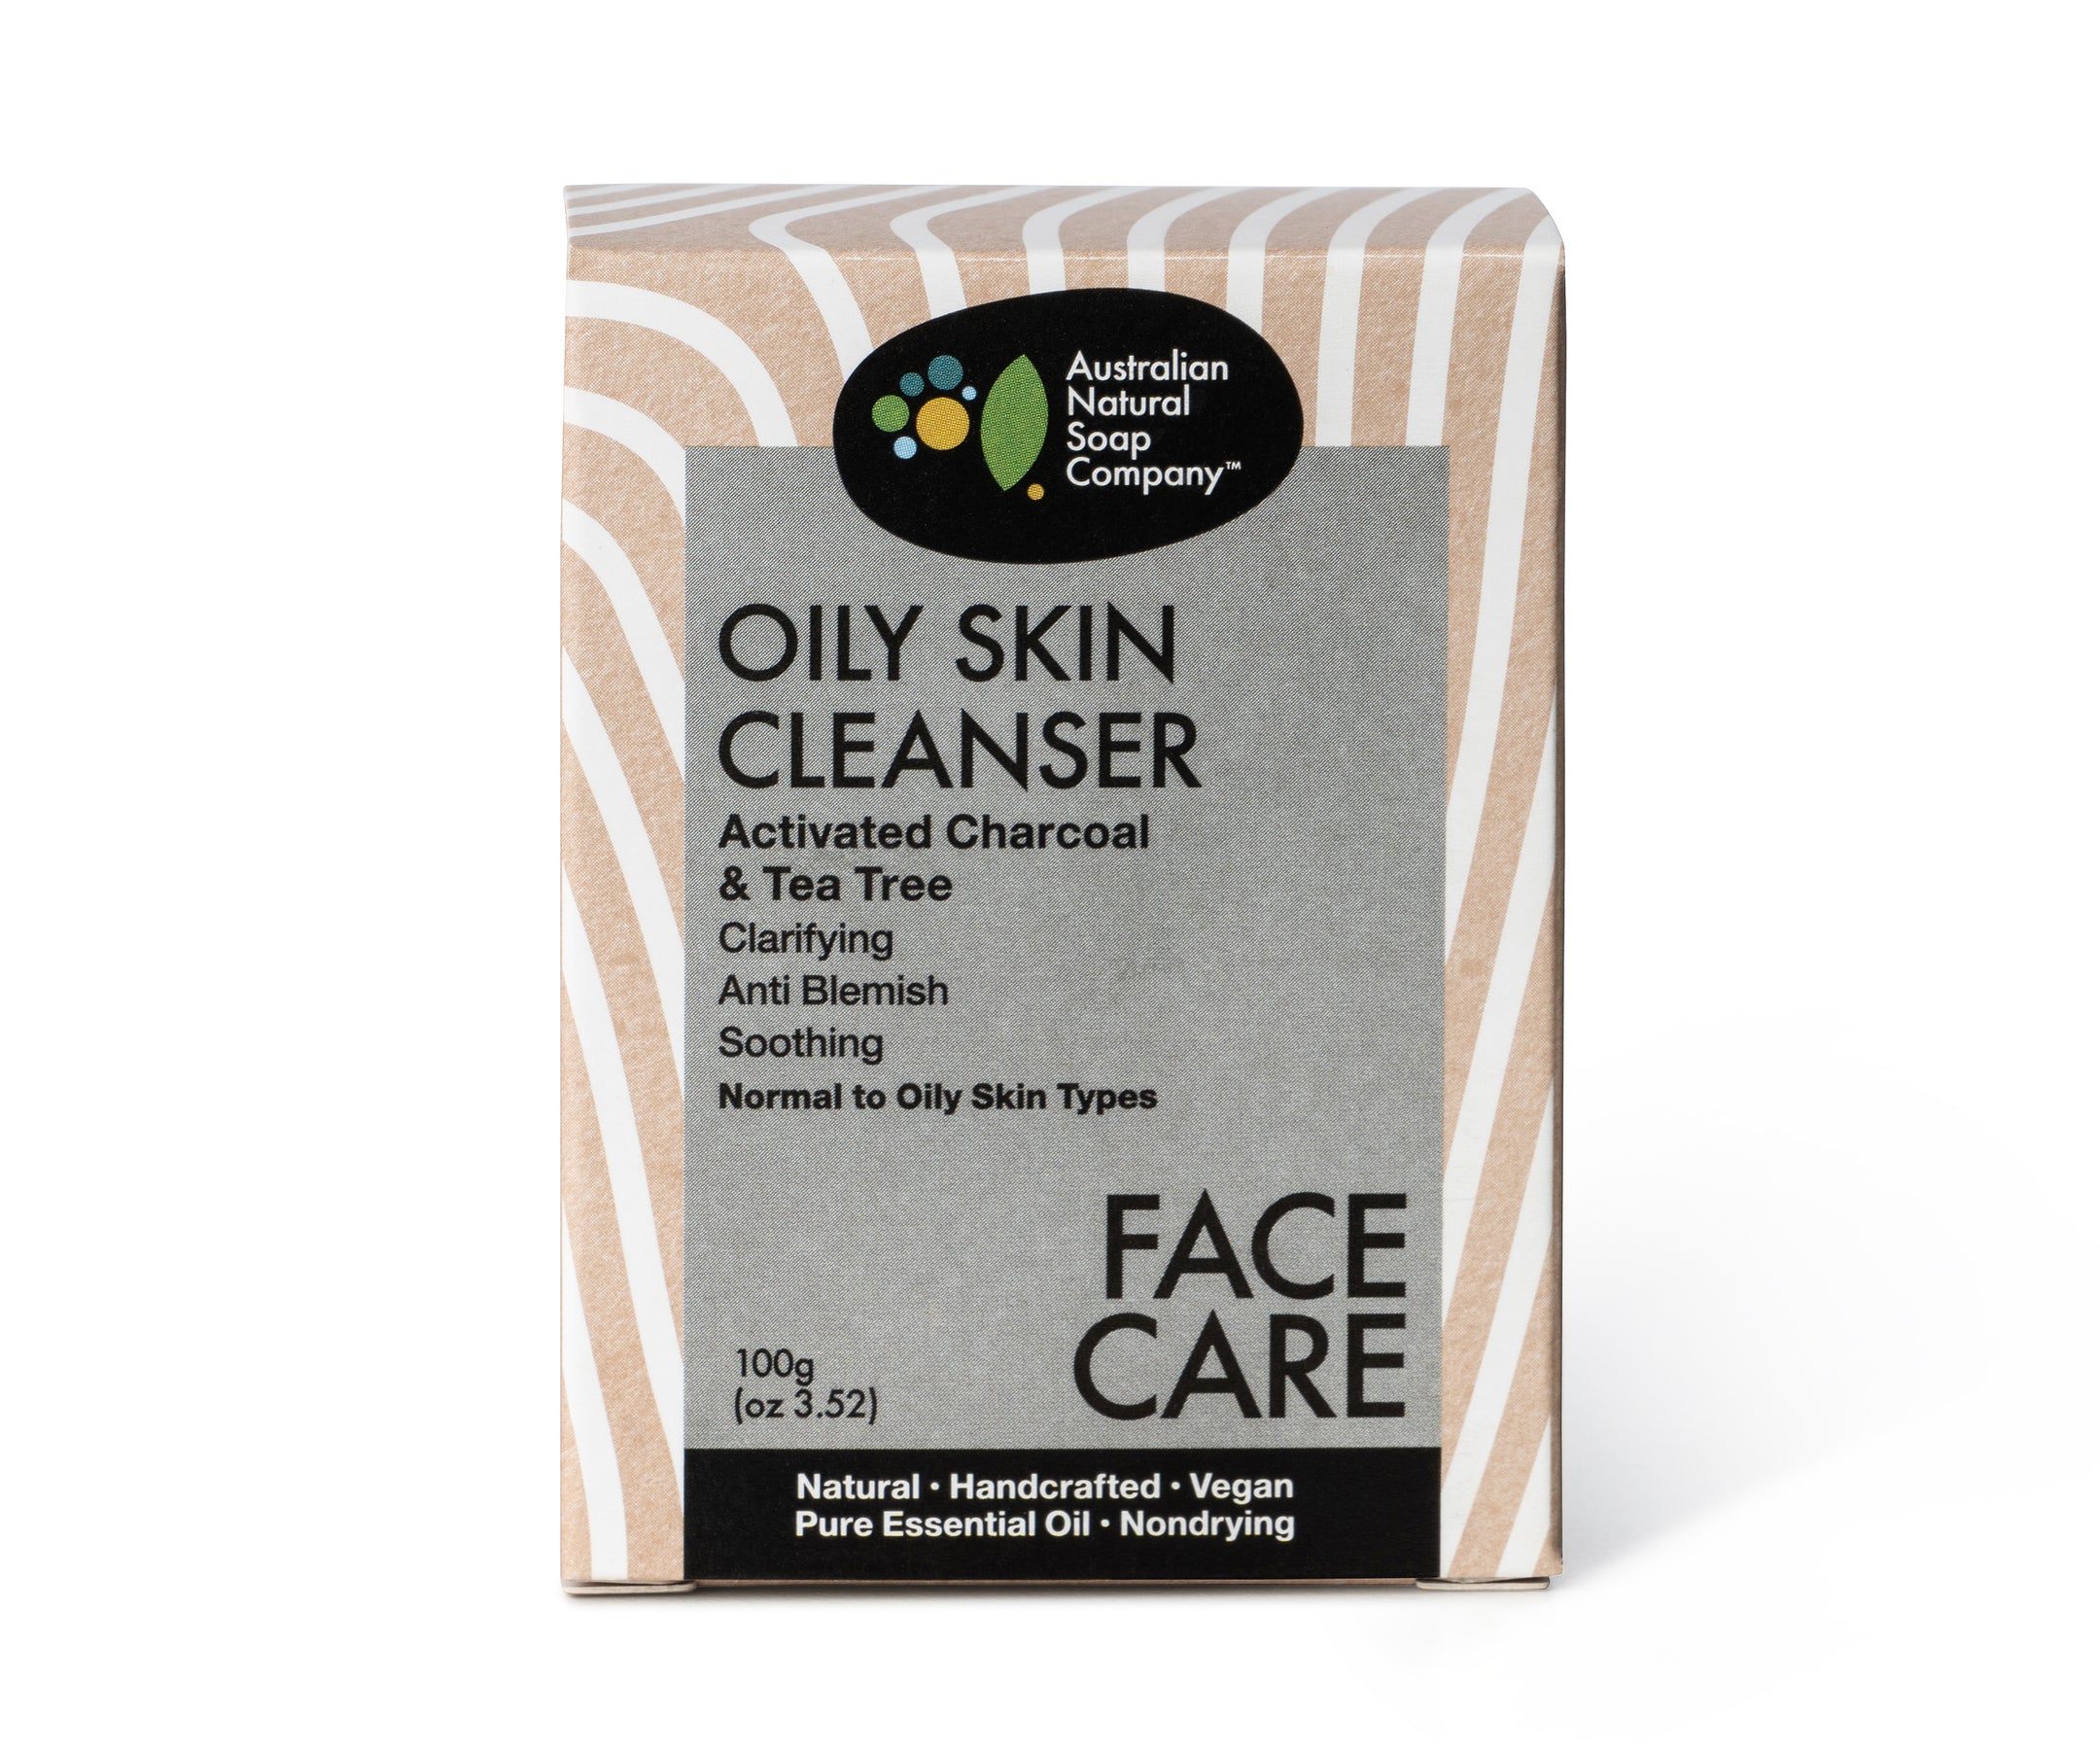 Australian Natural Soap Company Oily Skin Face Cleanser Bar Front of Box